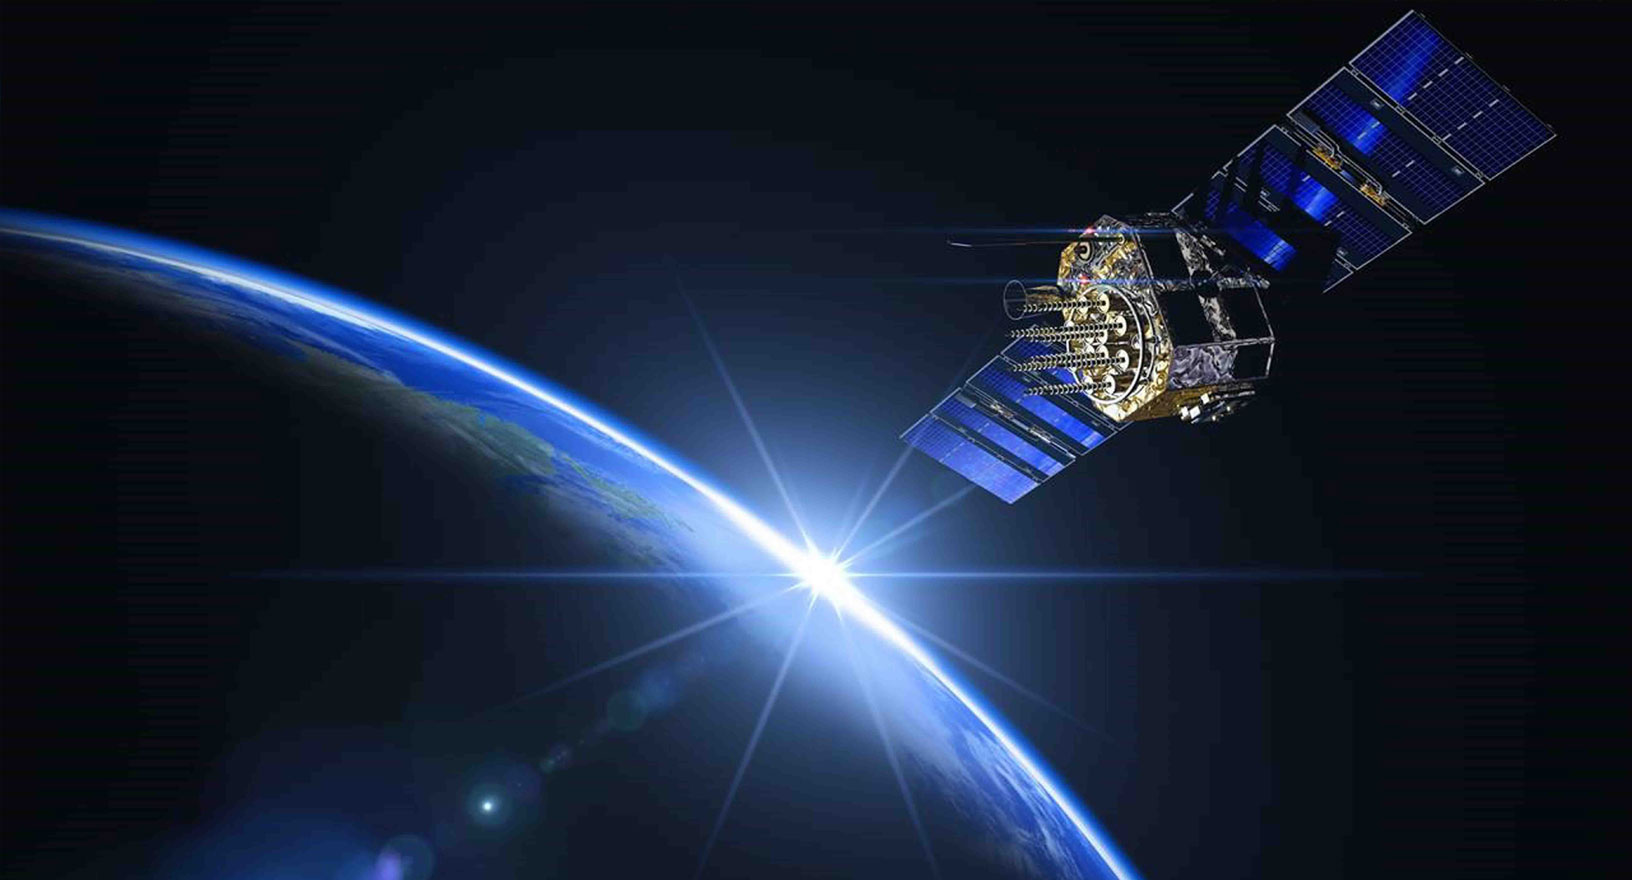 A Global Navigation Satellite System satellite pictured orbiting the Earth in space.